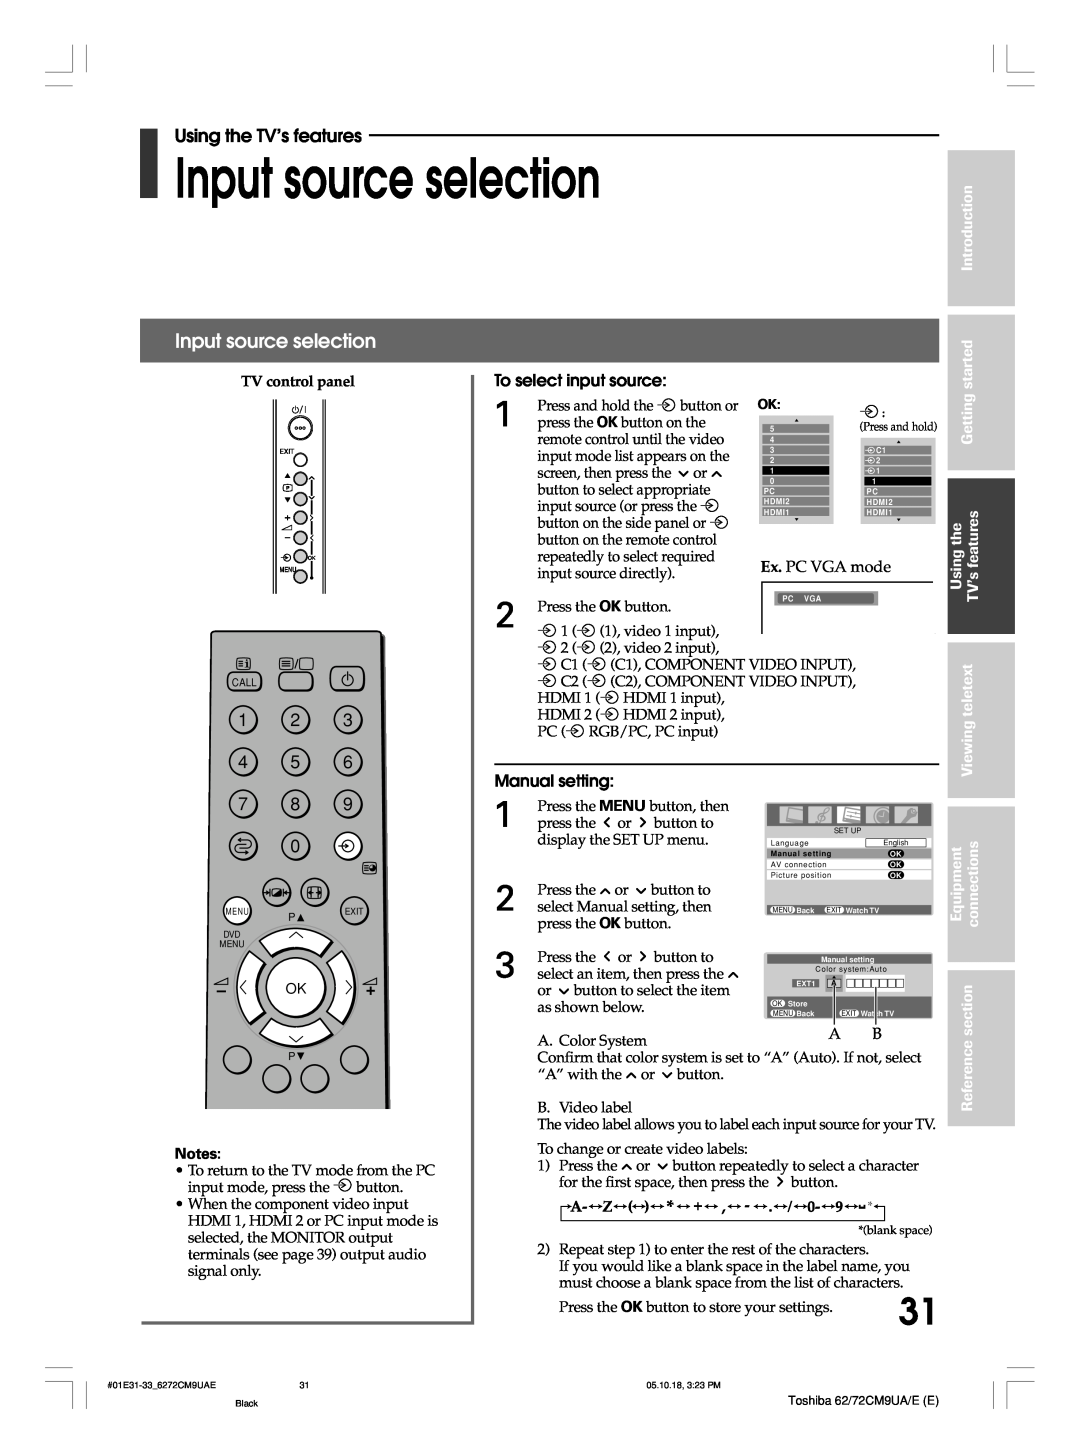 Toshiba 72CM9UA Input source selection, To select input source, Manual setting, Using the TV’s features, 1 2 4 5 7 8 